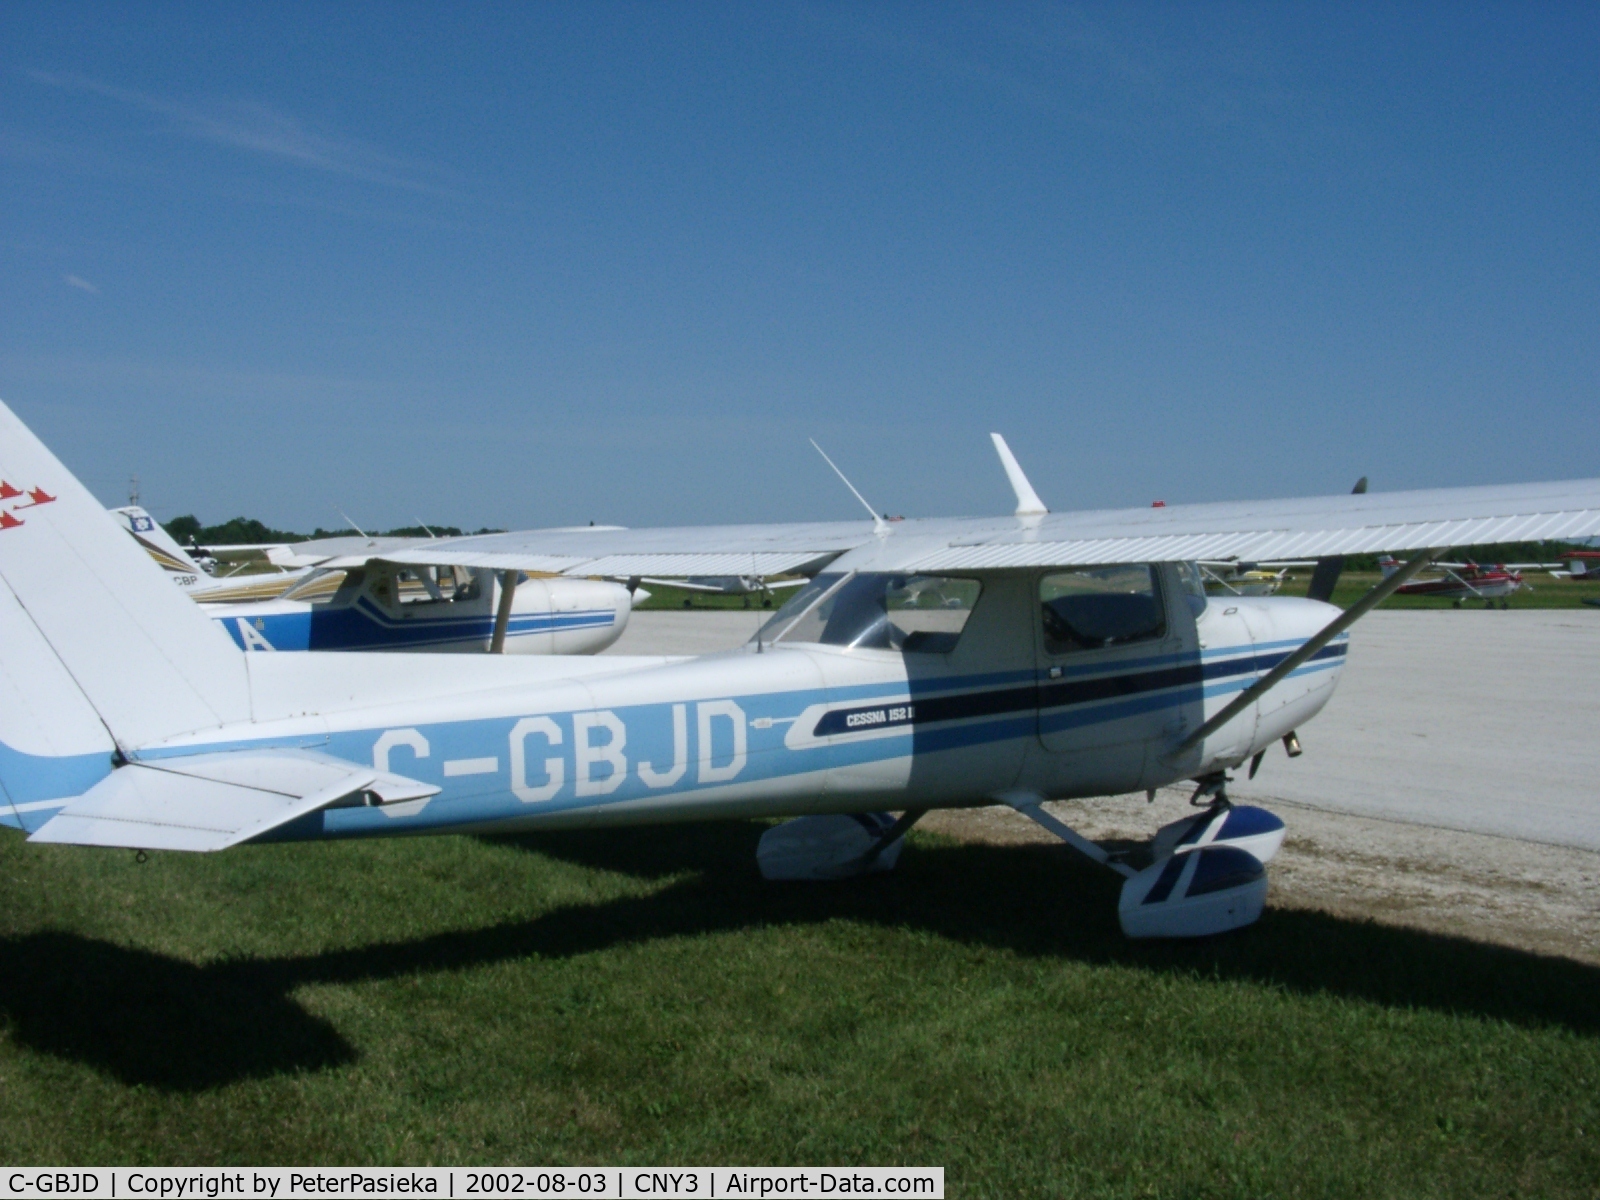 C-GBJD, 1979 Cessna 152 C/N 15283880, @ Collingwood Airport, ON